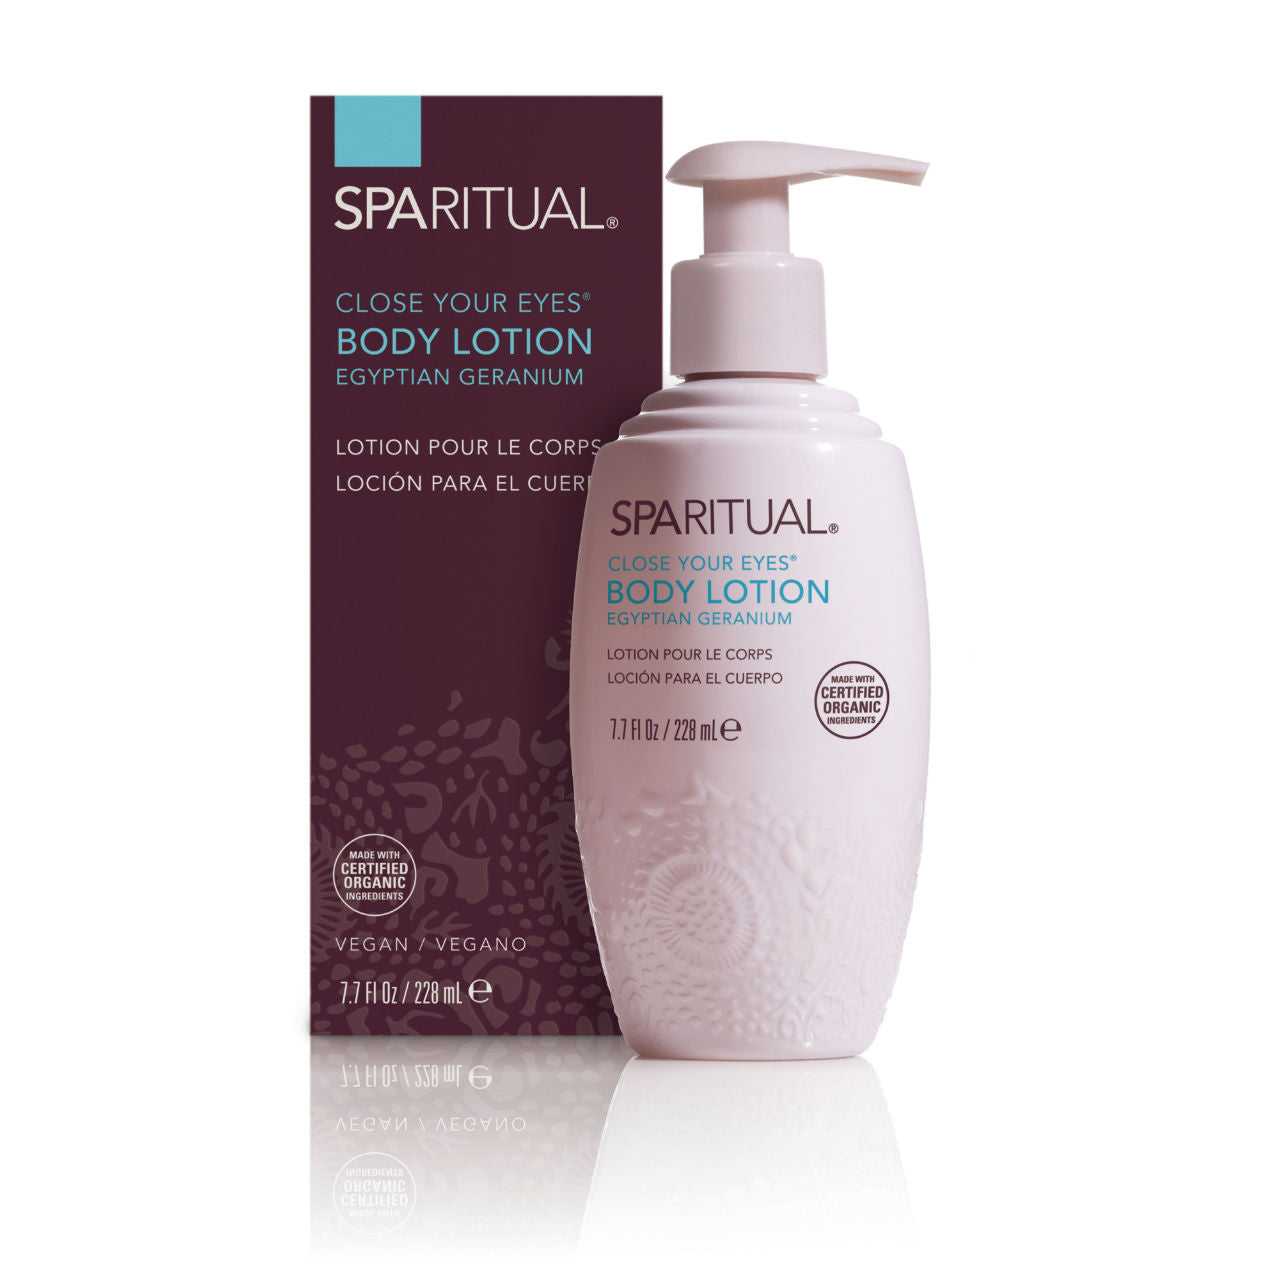 SPARITUAL Close Your Eyes Body Lotion Box